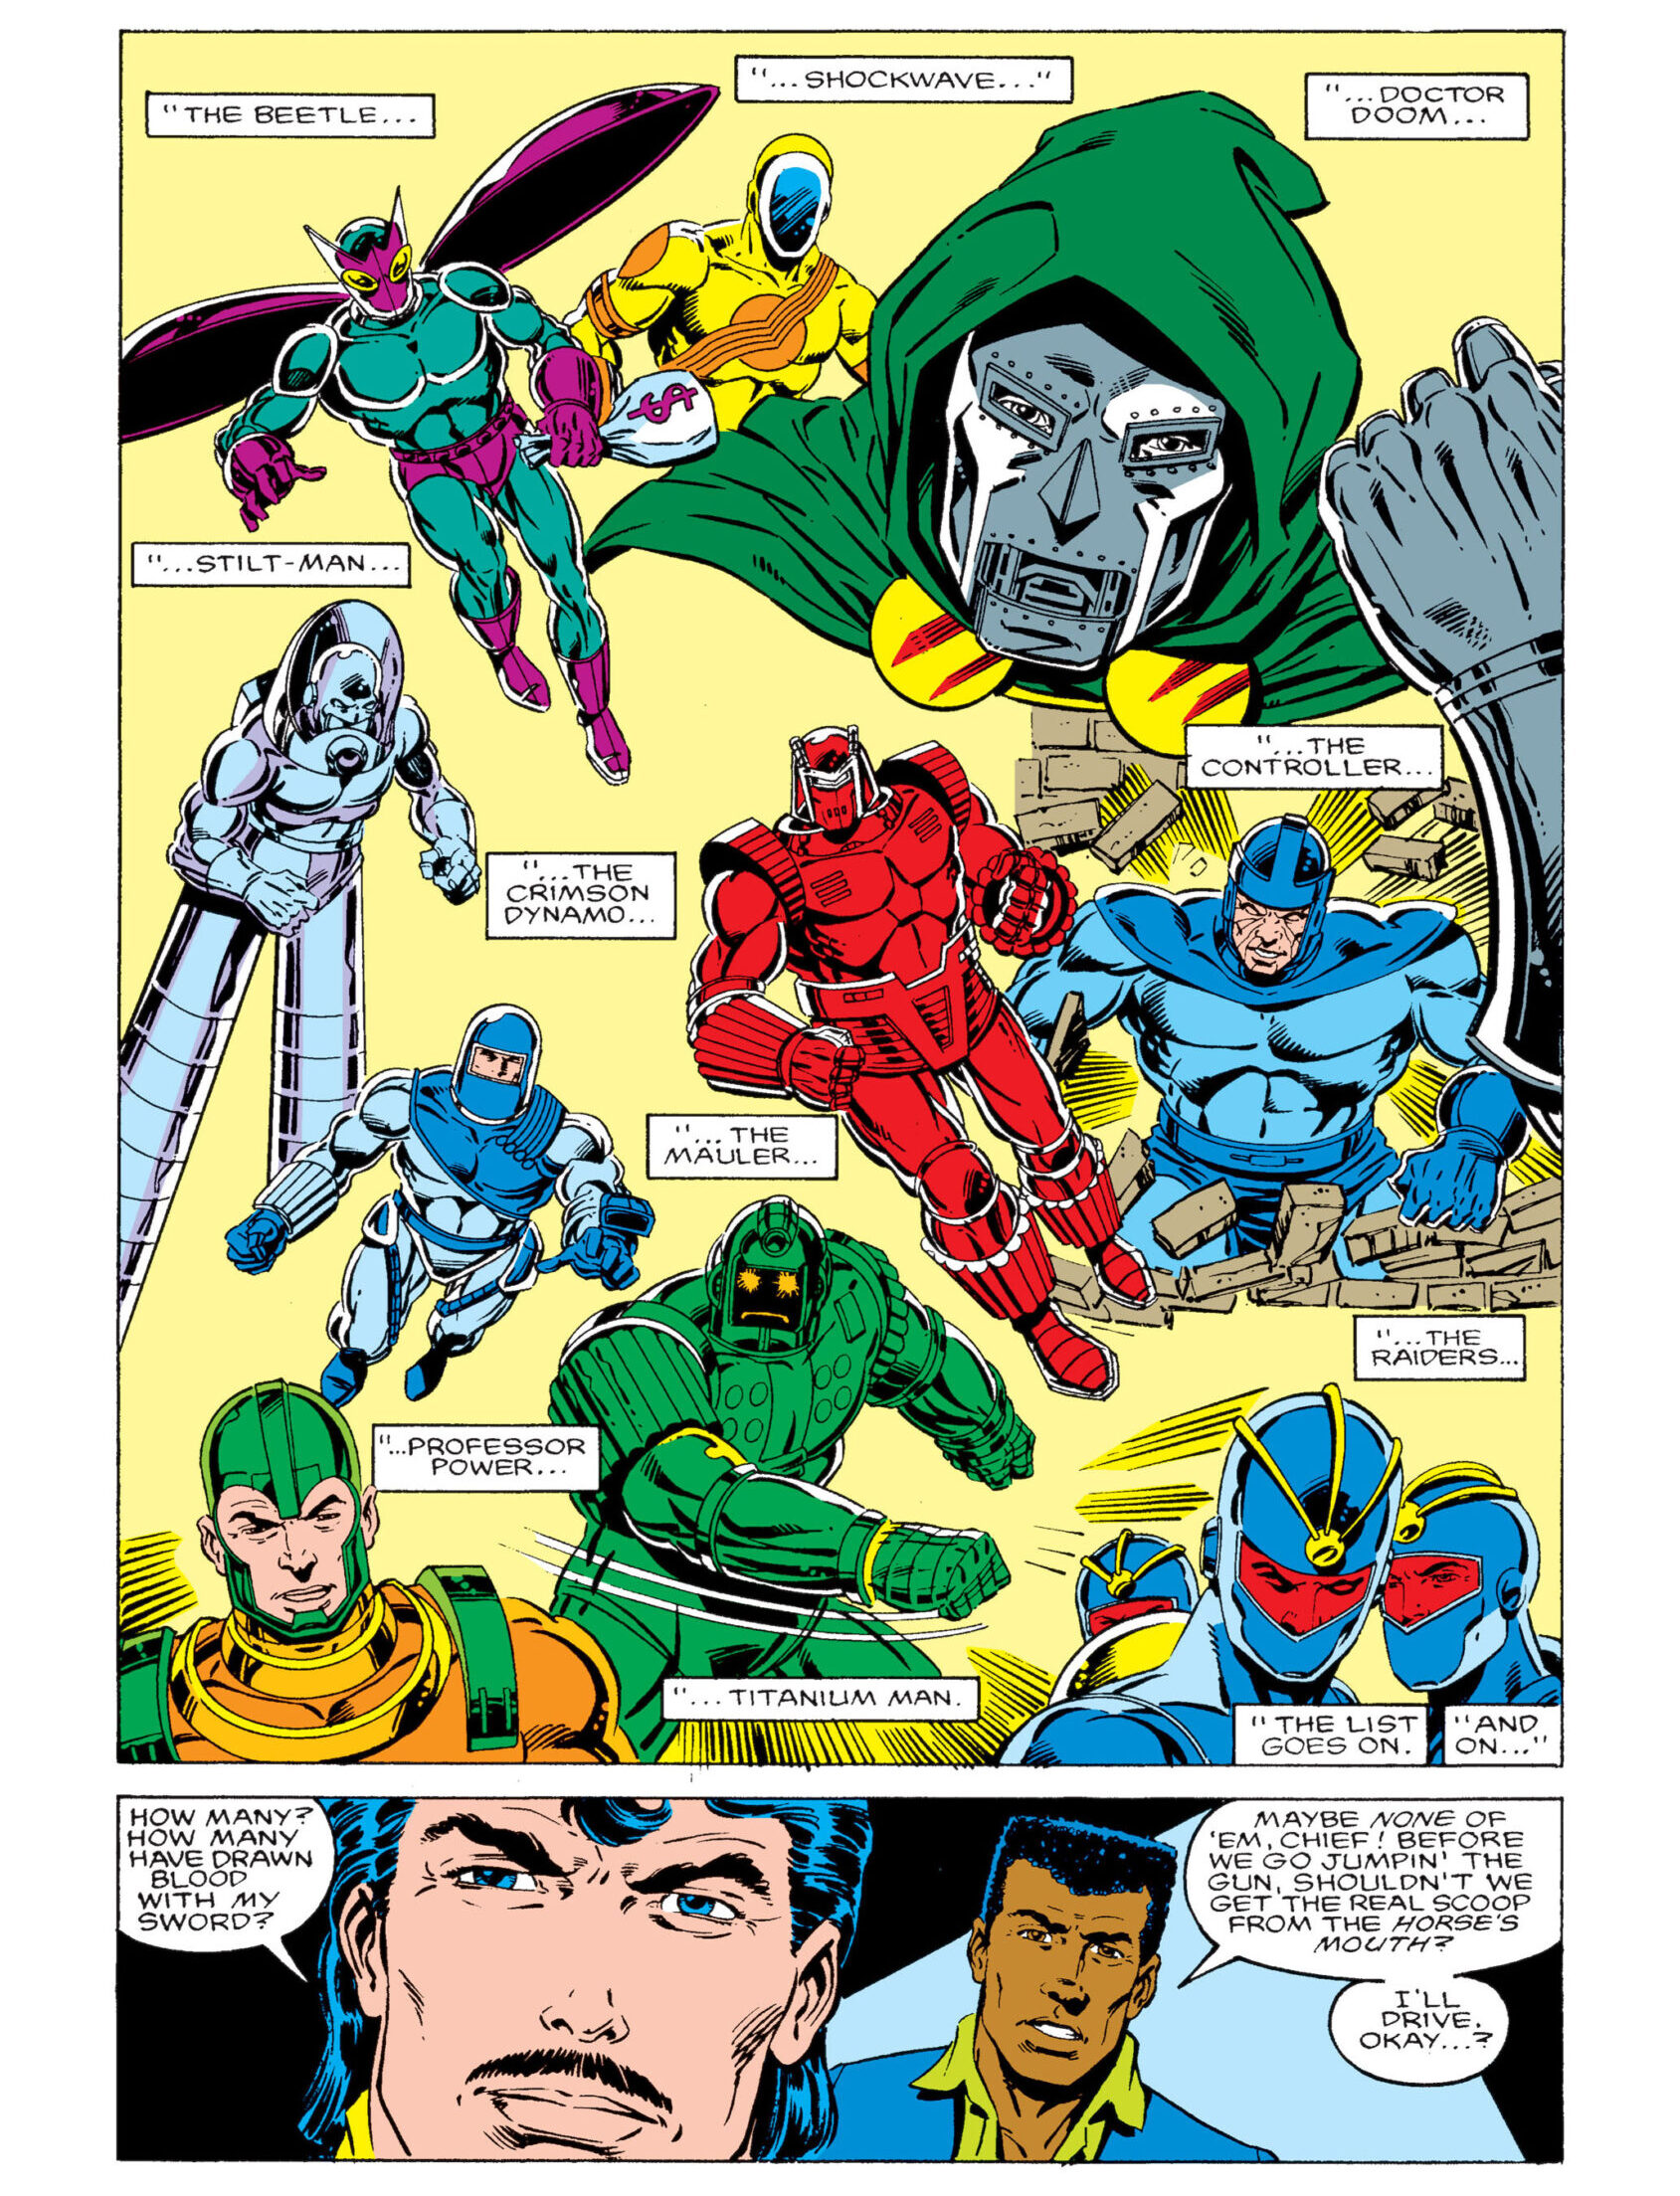 The Avengers have words with Tony Stark in Iron Man Vol. 1 #225 "Stark Wars, Chapter I" (1987), Marvel Comics. Words by David Michelinie, and Bob Layton, art by Mark Bright, Bob Layton, Bob Sharen, and Janice Chiang.